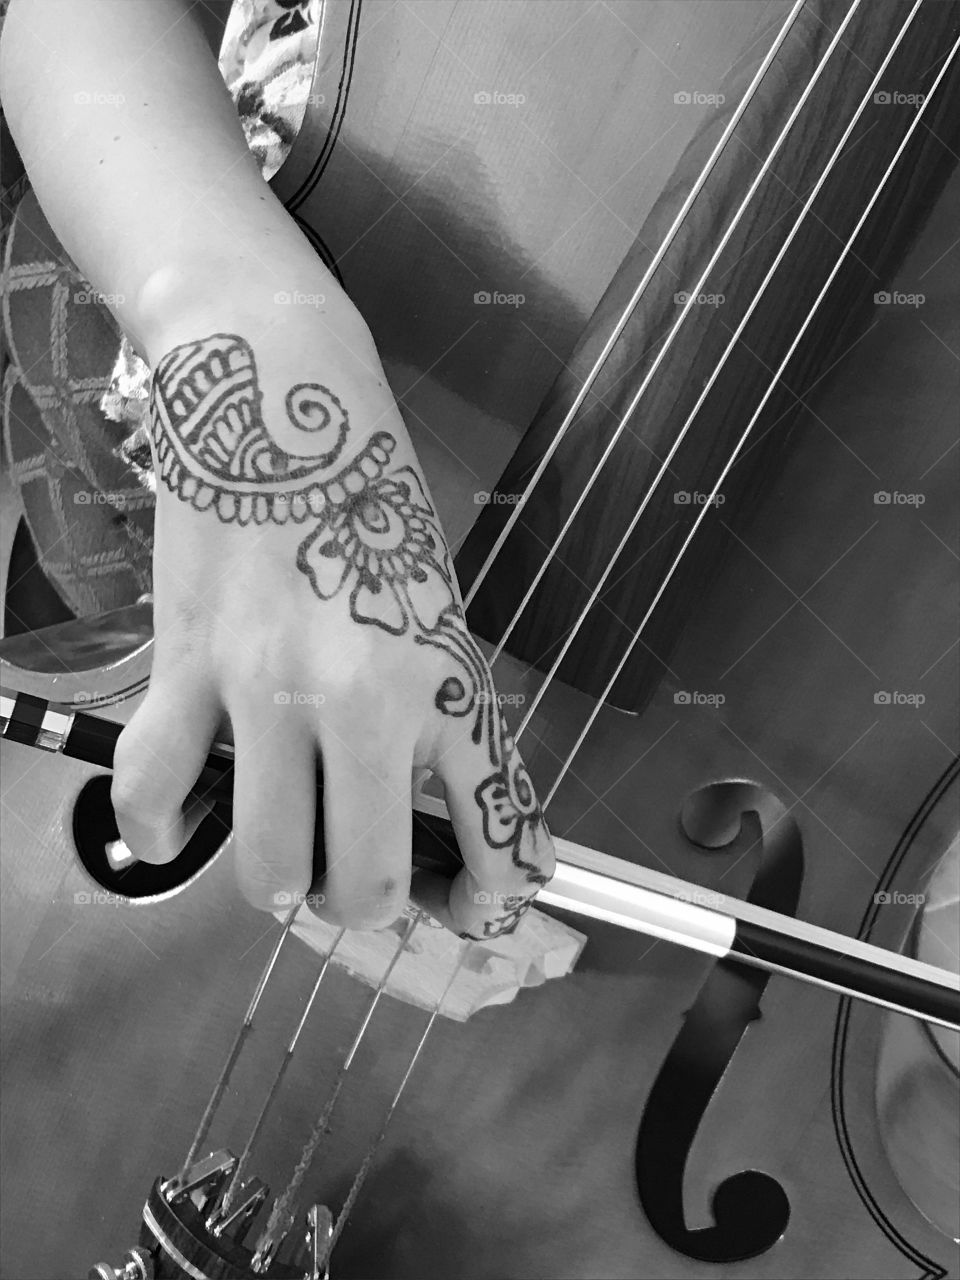 The beauty of music: my amazing pre-teen daughter was practicing her cello for an audition today and the beauty of her hand with the flowery details of henna tattoo set against the slick, smooth lines of the bow and body of the cello struck me as needing to be photographed and shared. Enjoy!